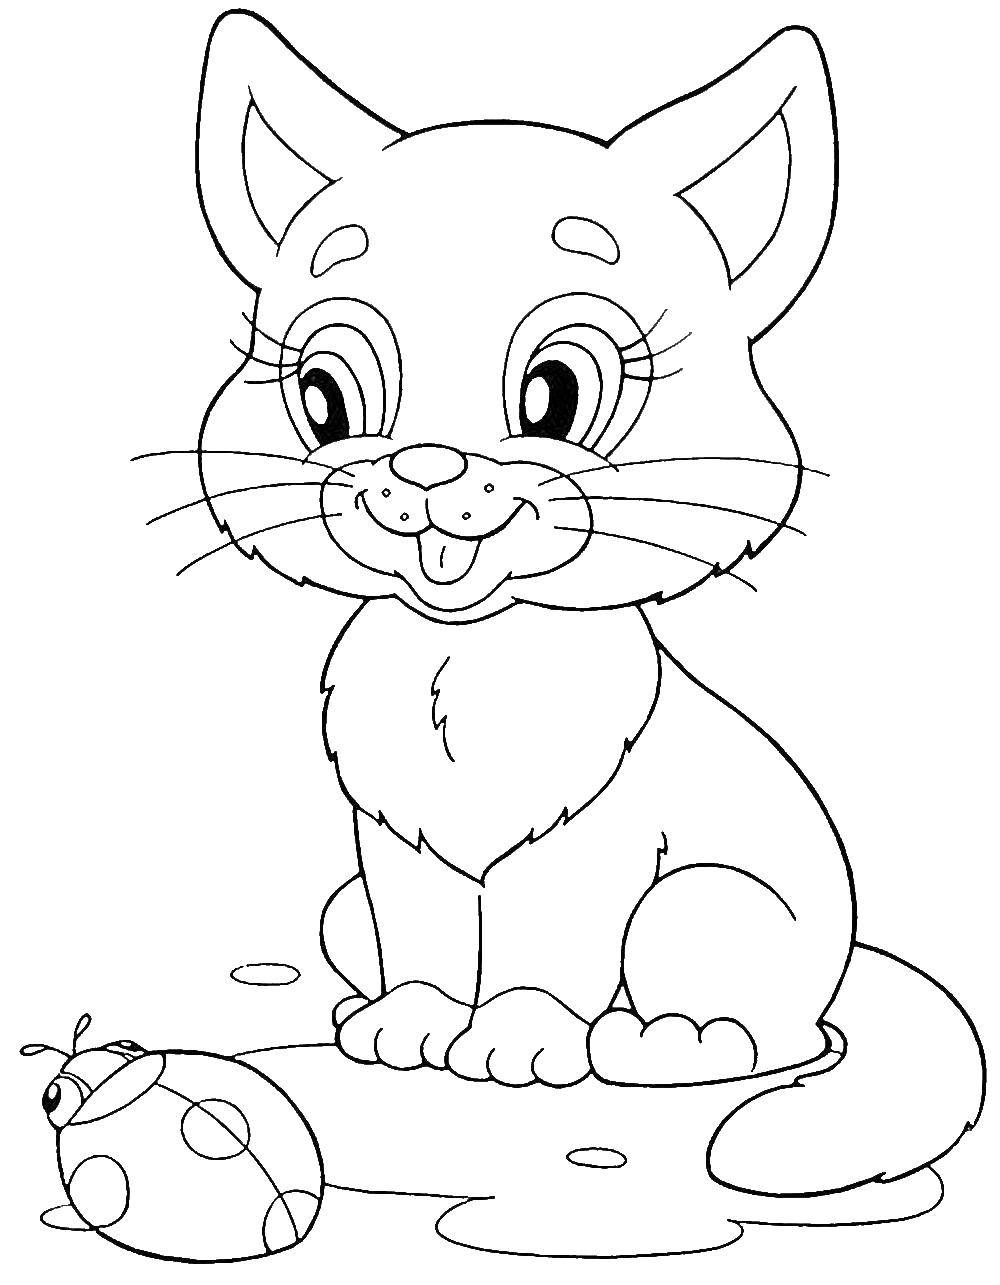 Coloring The kitten plays with Ladybird. Category Animals. Tags:  cat, cat.